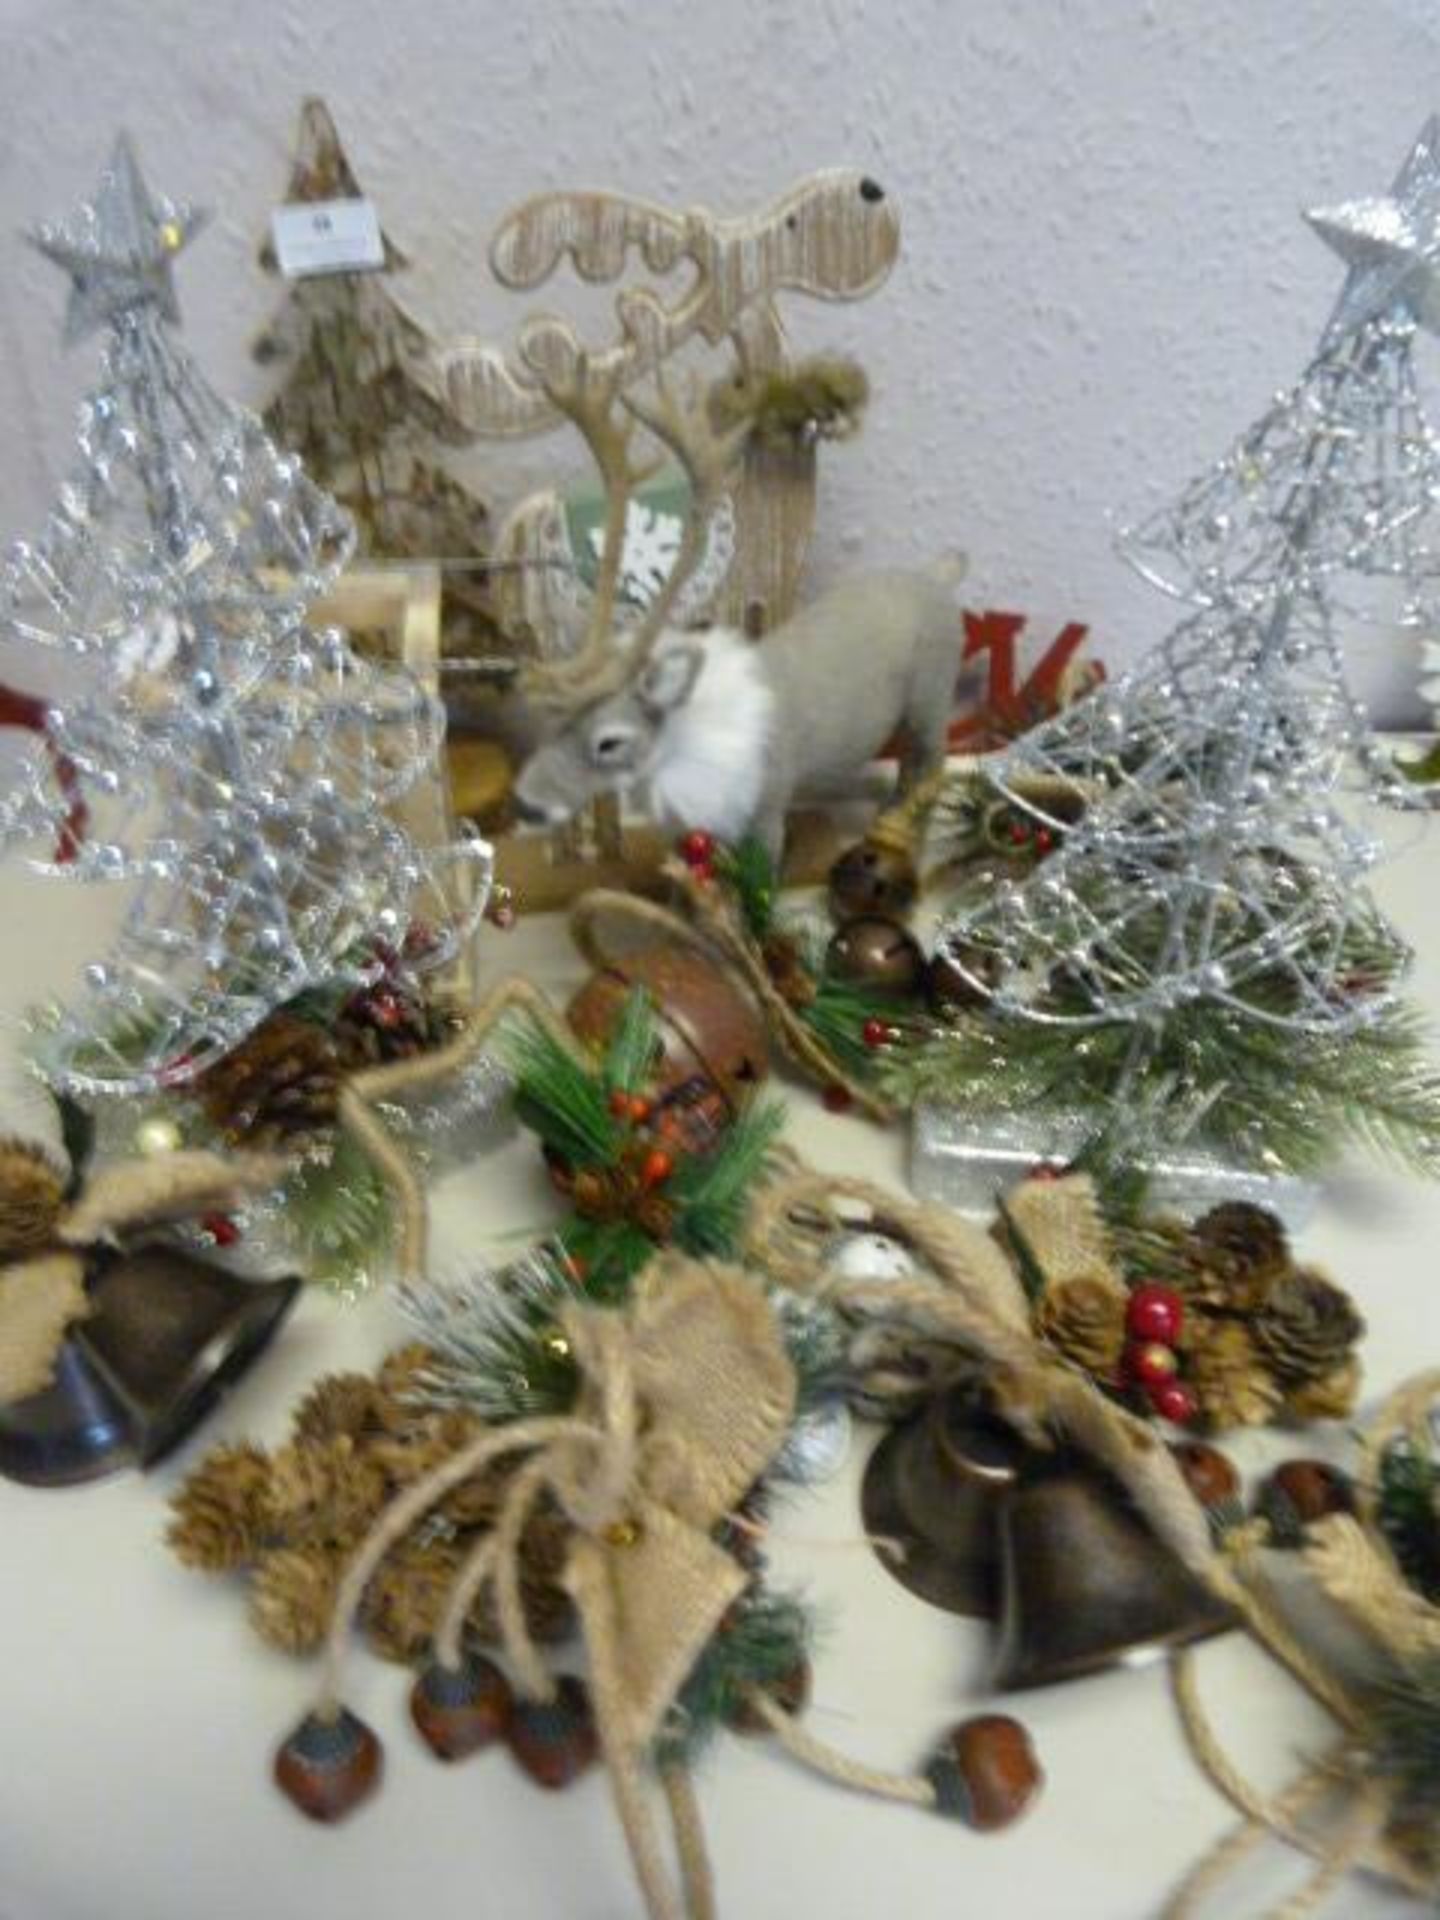 Quantity of Assorted Christmas Decorations